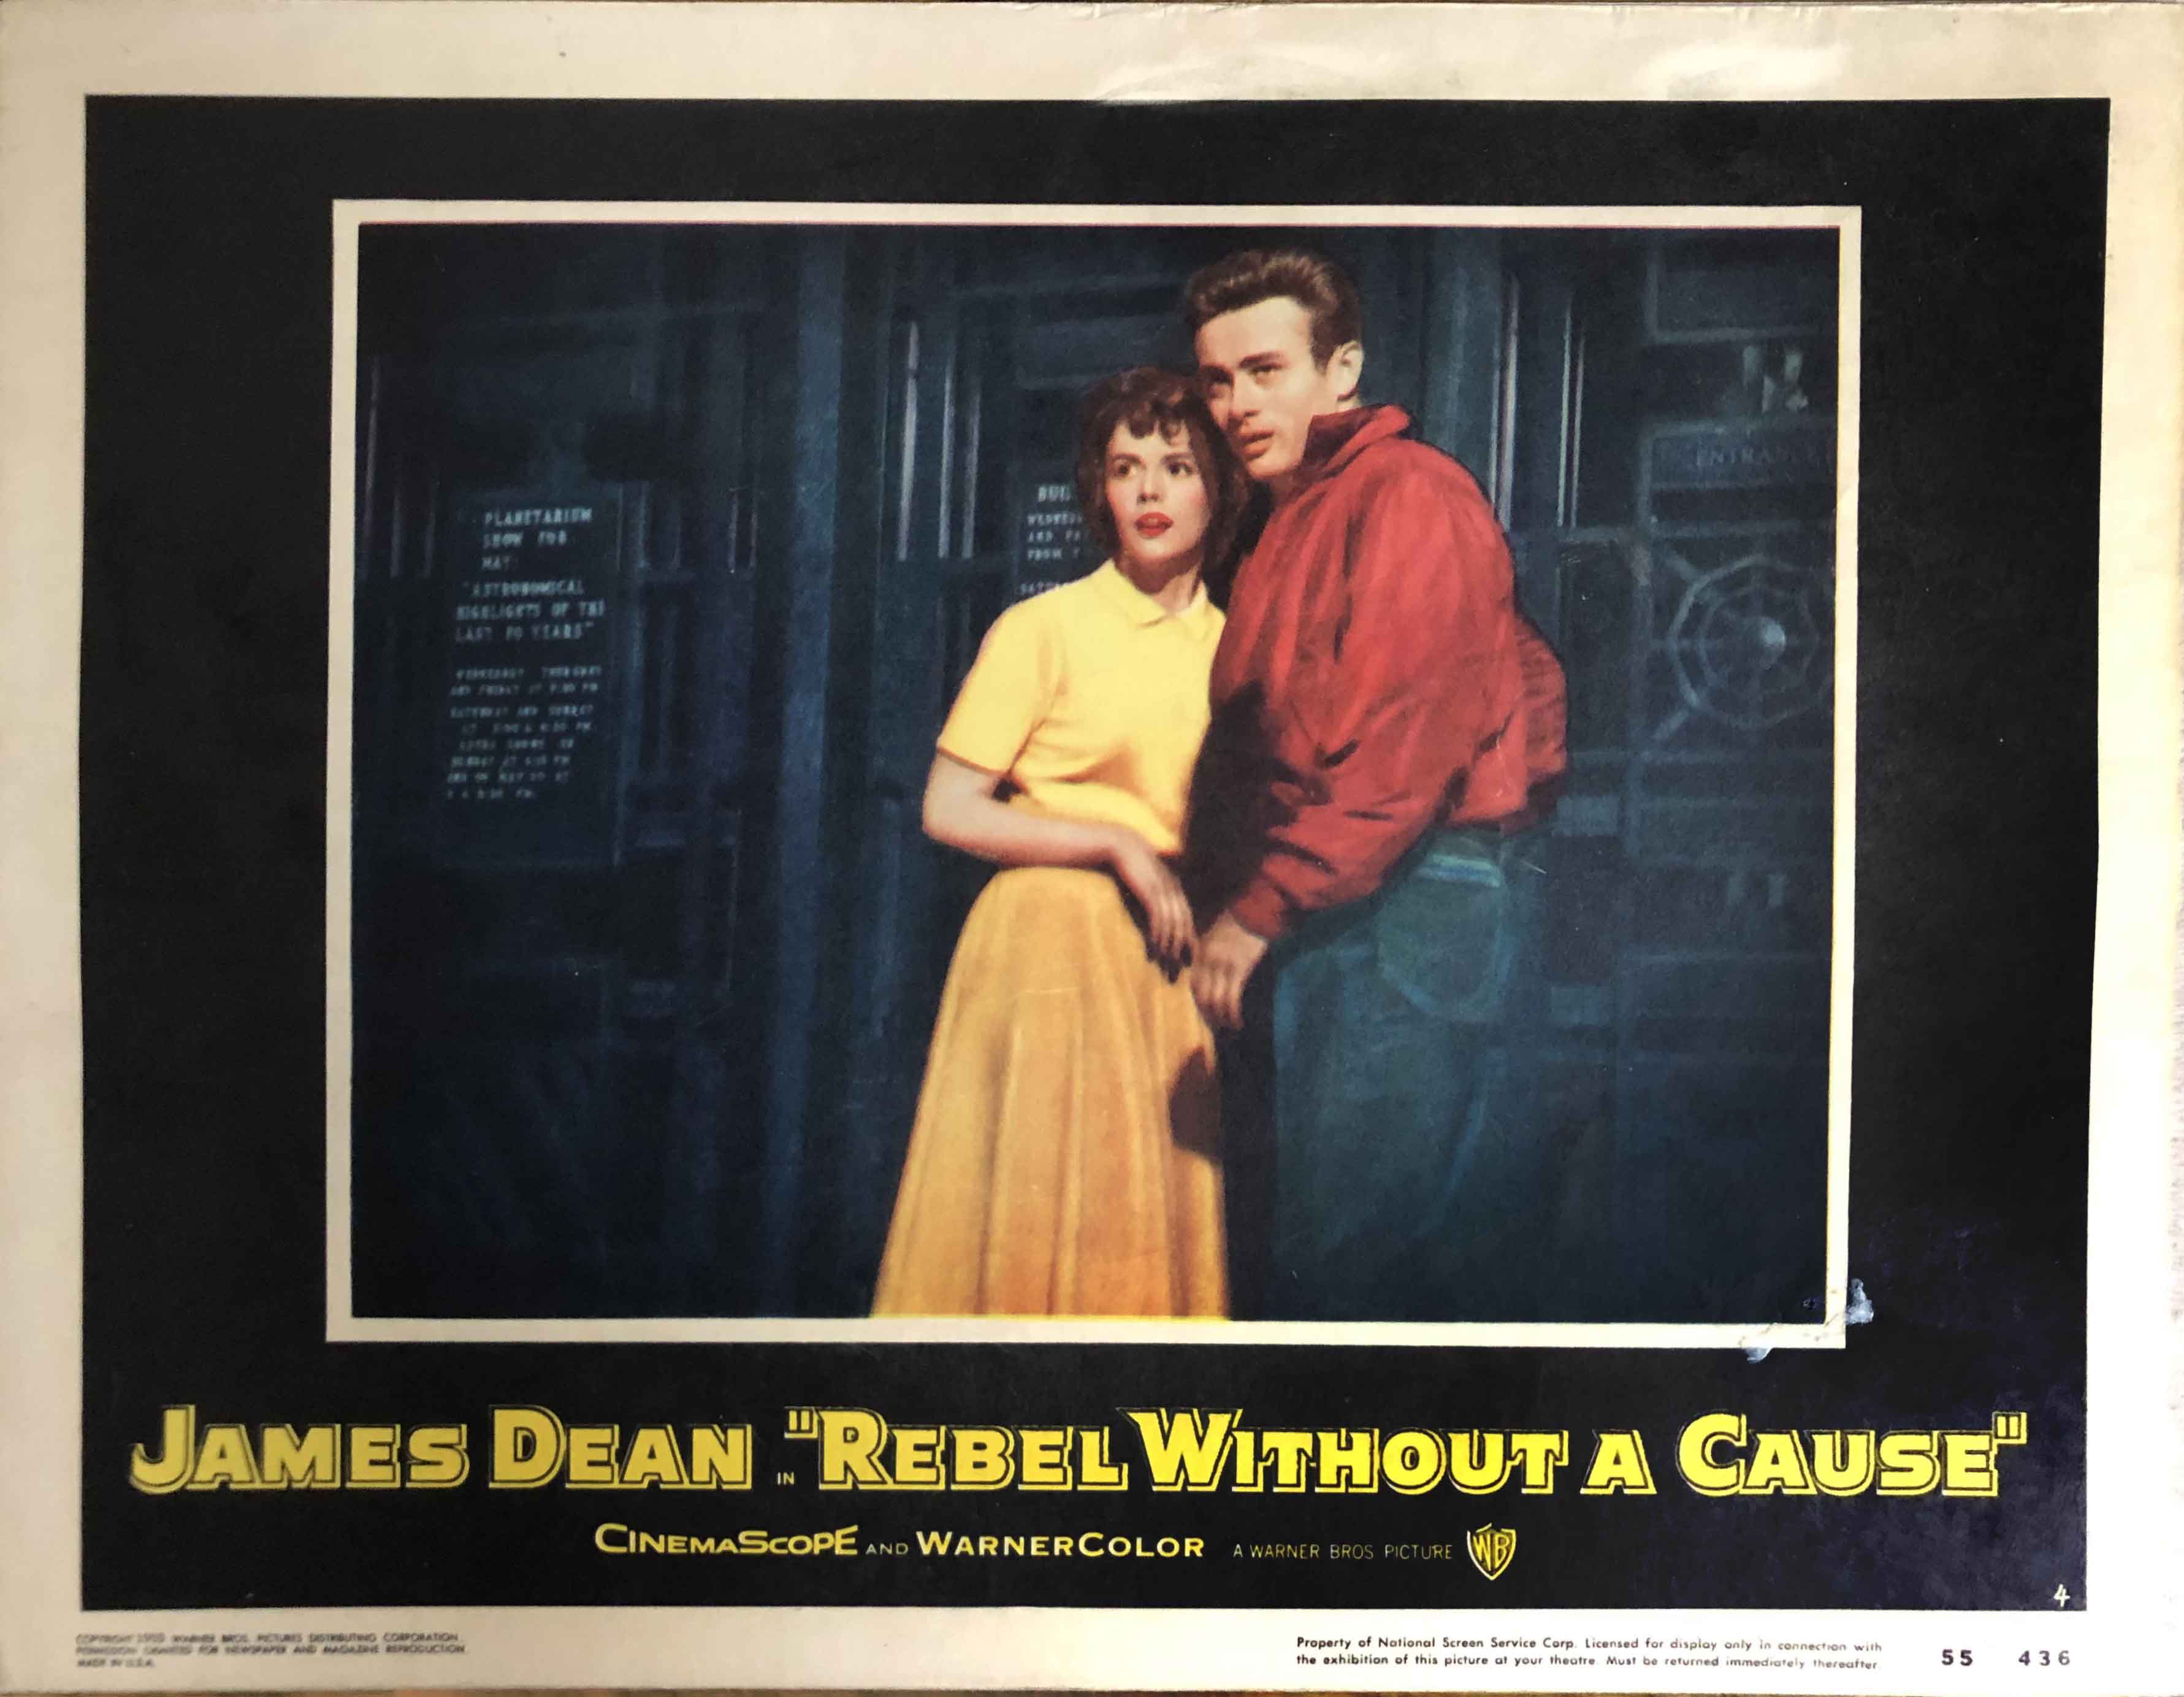 Rebel without a cause, 1955 Enlarged